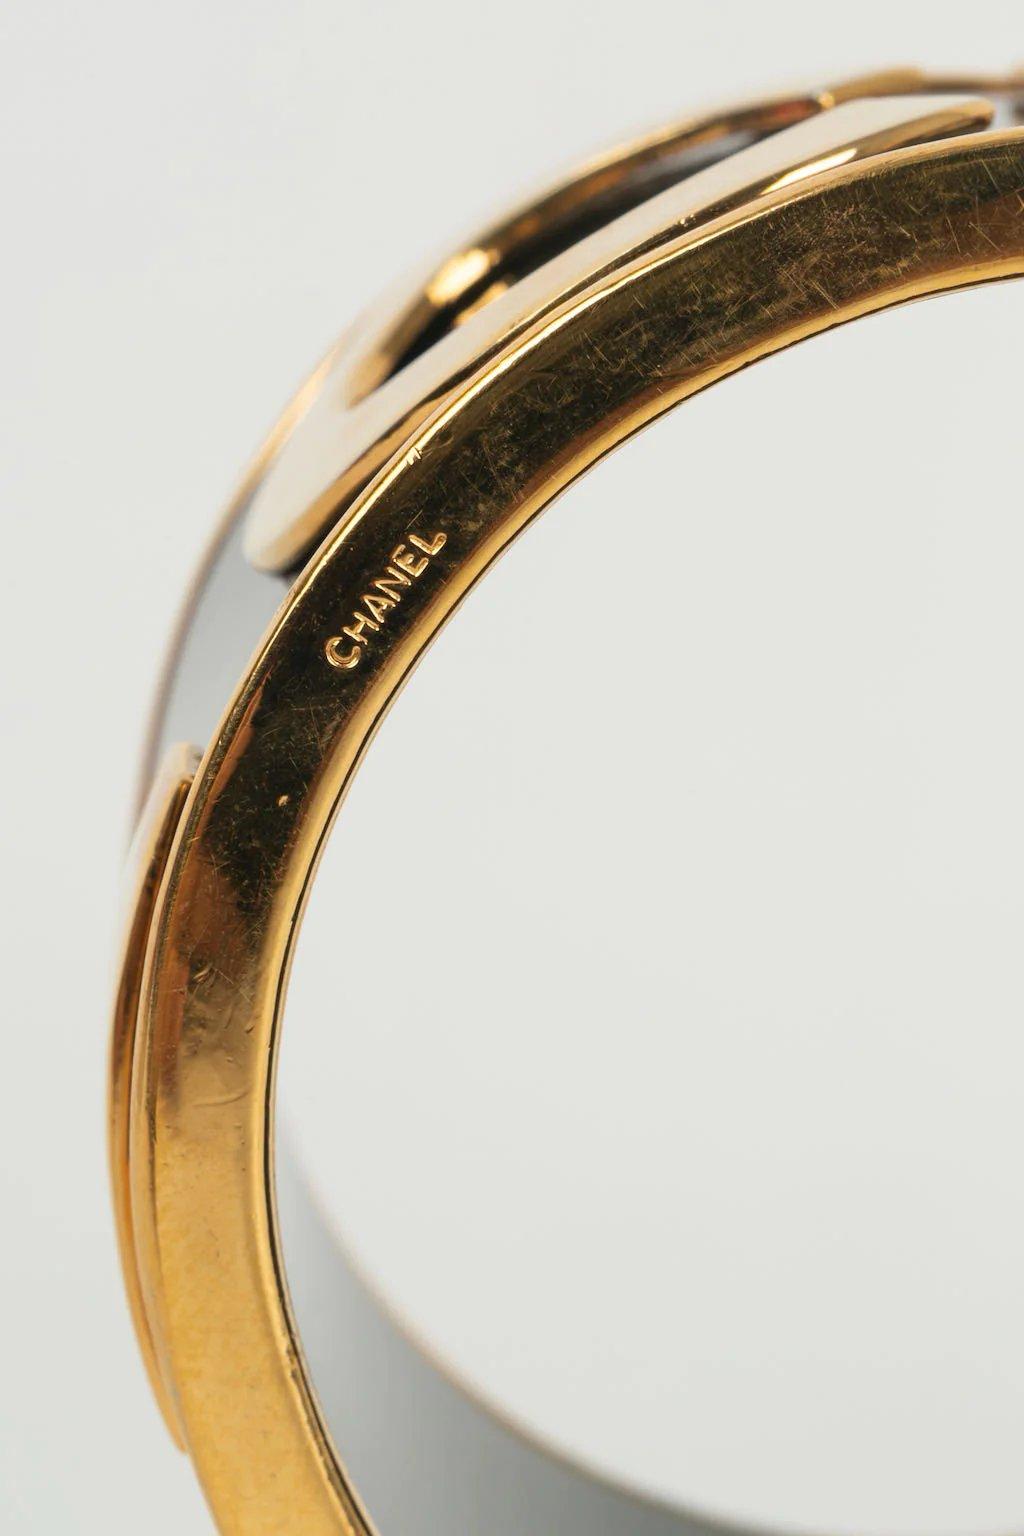 Women's Chanel Cuff Bracelt in Black and Gold, Spring 1990/91 For Sale